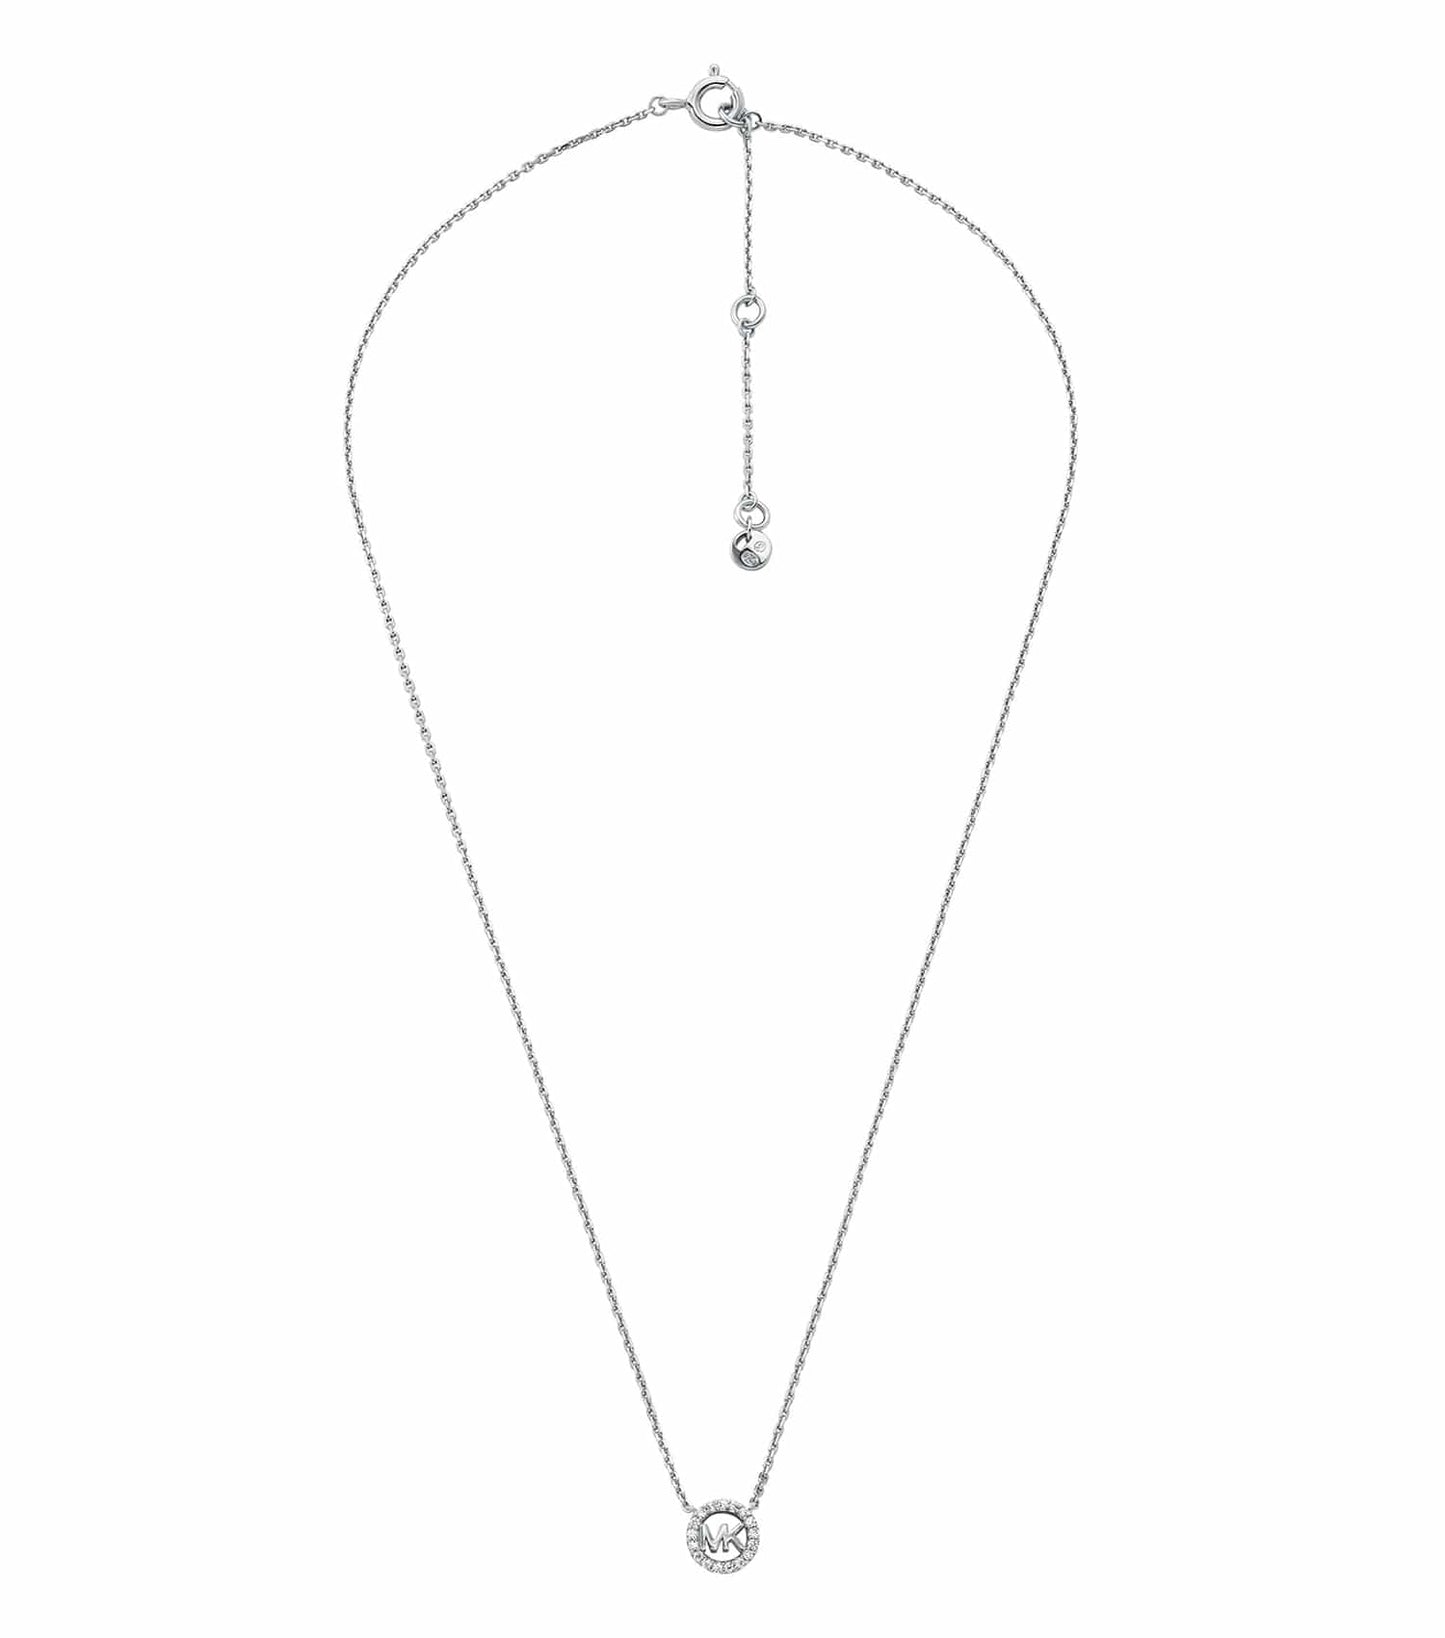 Women Premium Necklace Silver Sterling Silver